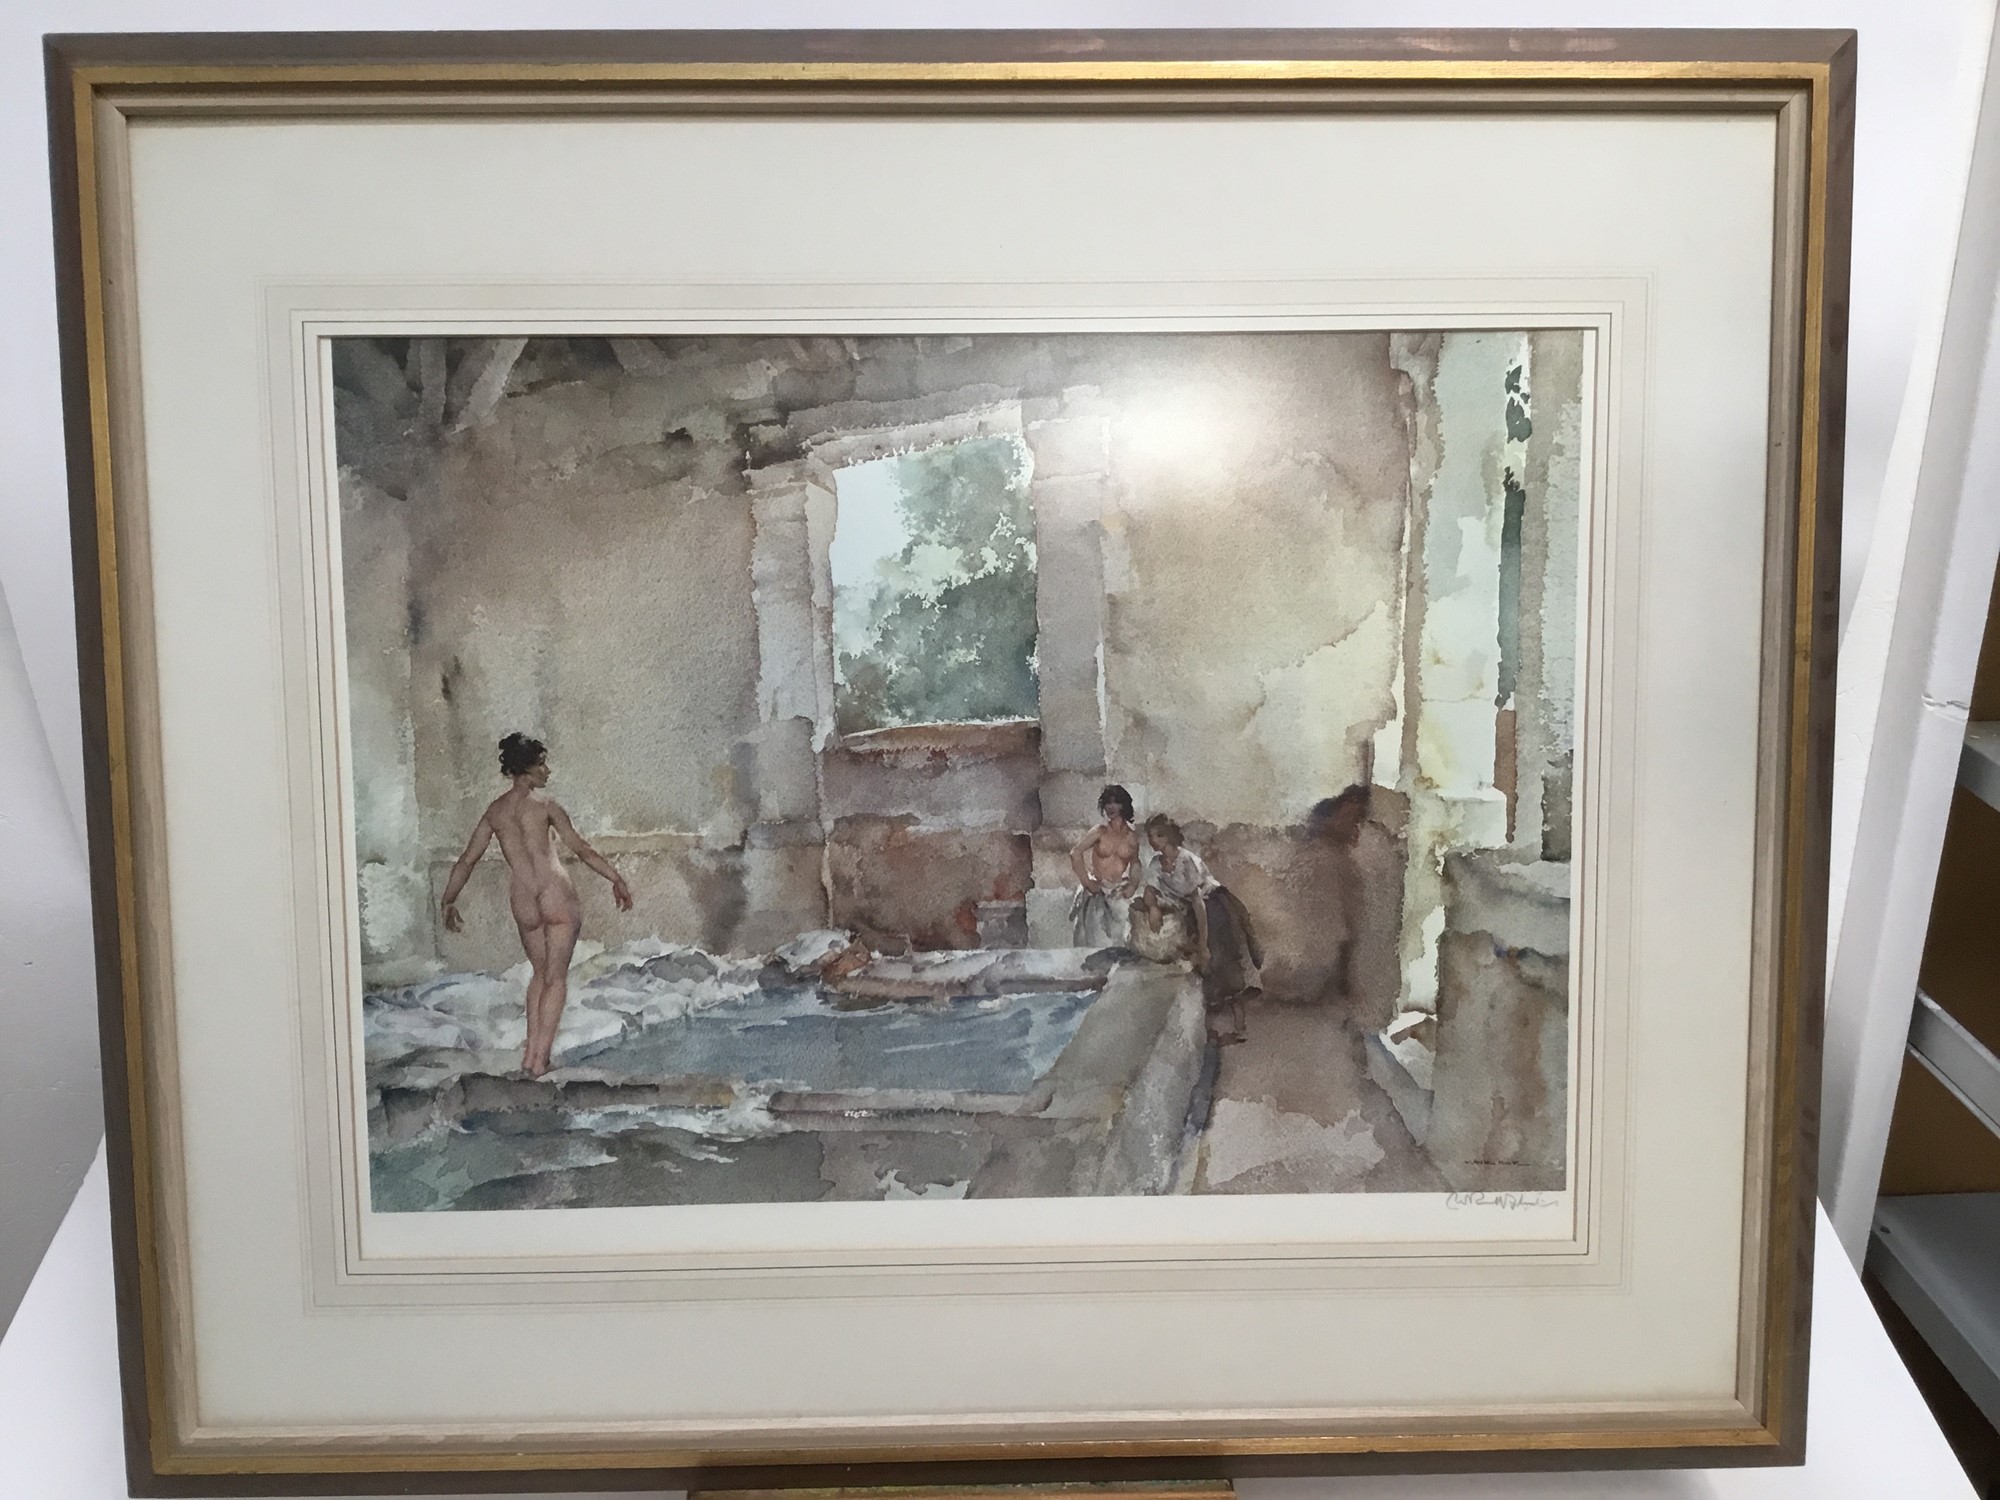 Signed William Rains Limited Edition Print 224/950 in Good